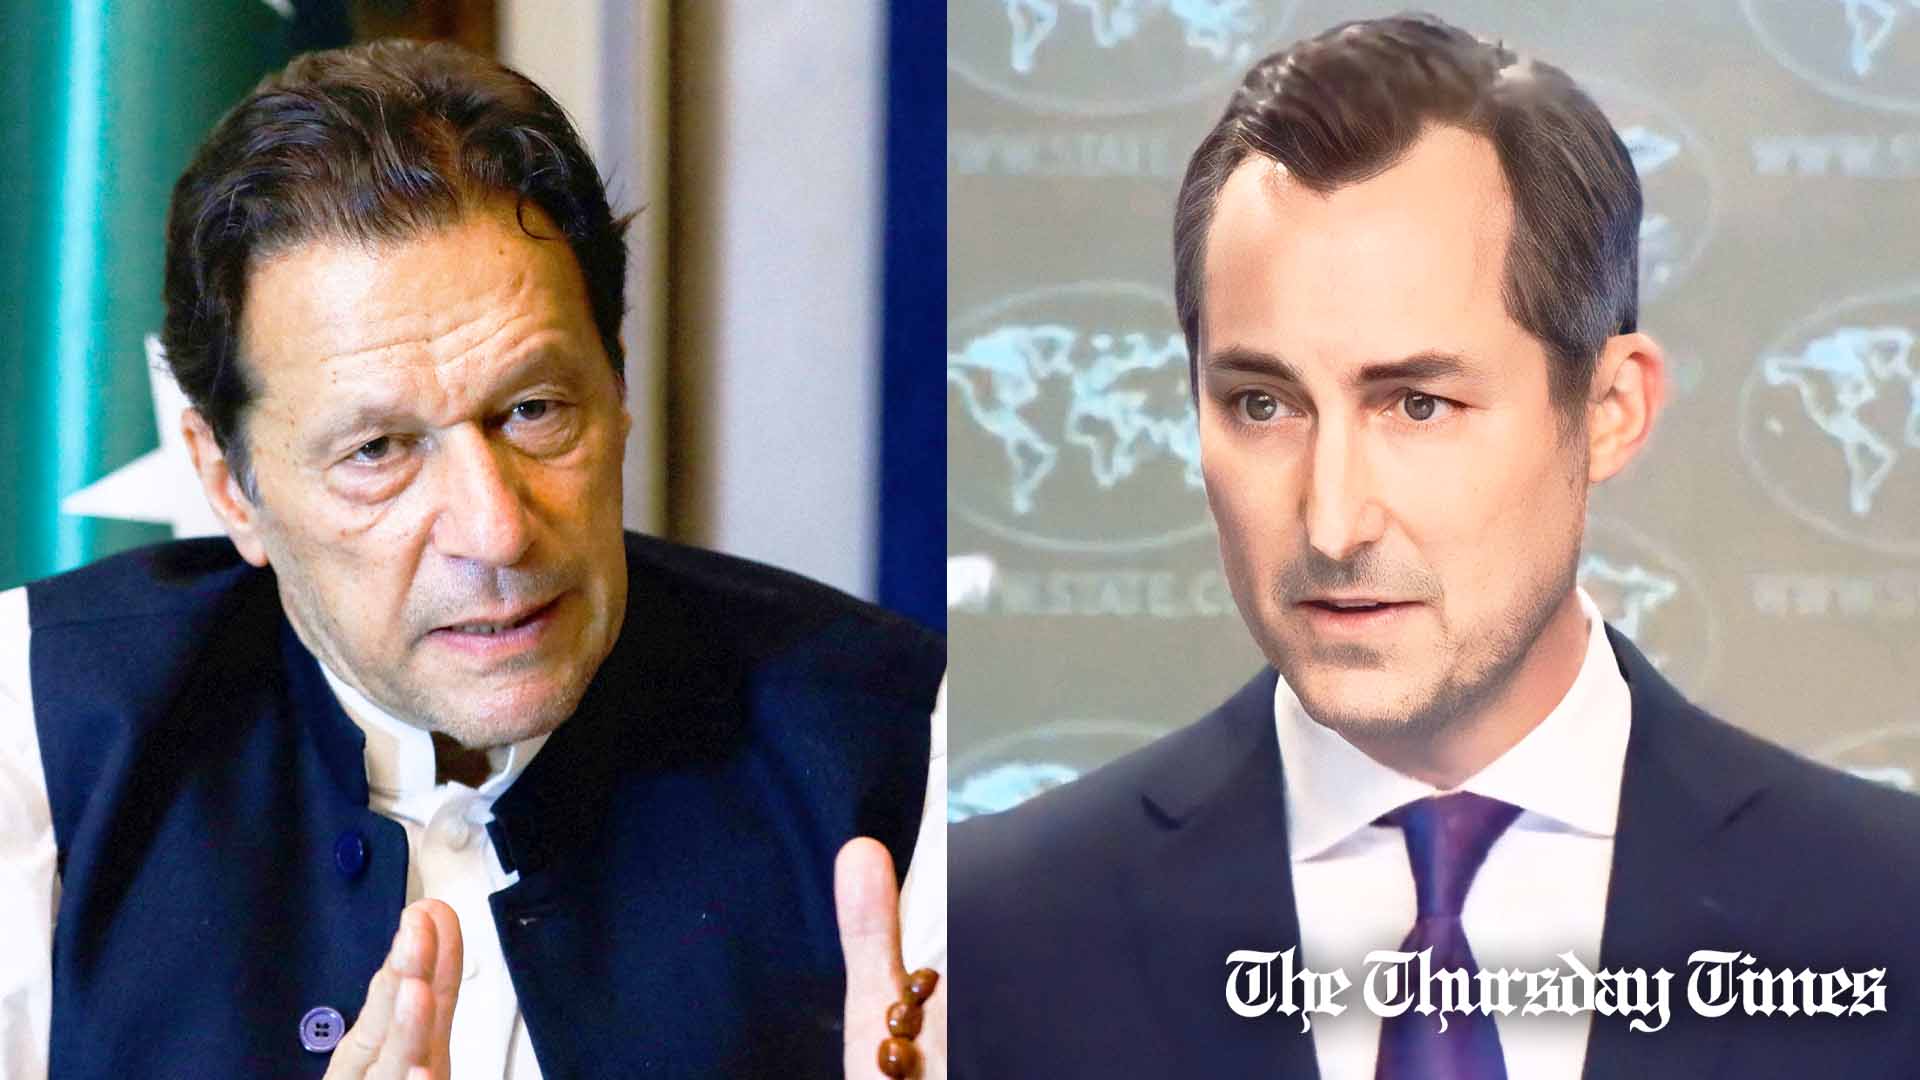 PTI chairman Imran Khan (L) and U.S. State Department spokesperson Matthew Miller (R) are shown. — FILE/THE THURSDAY TIMES